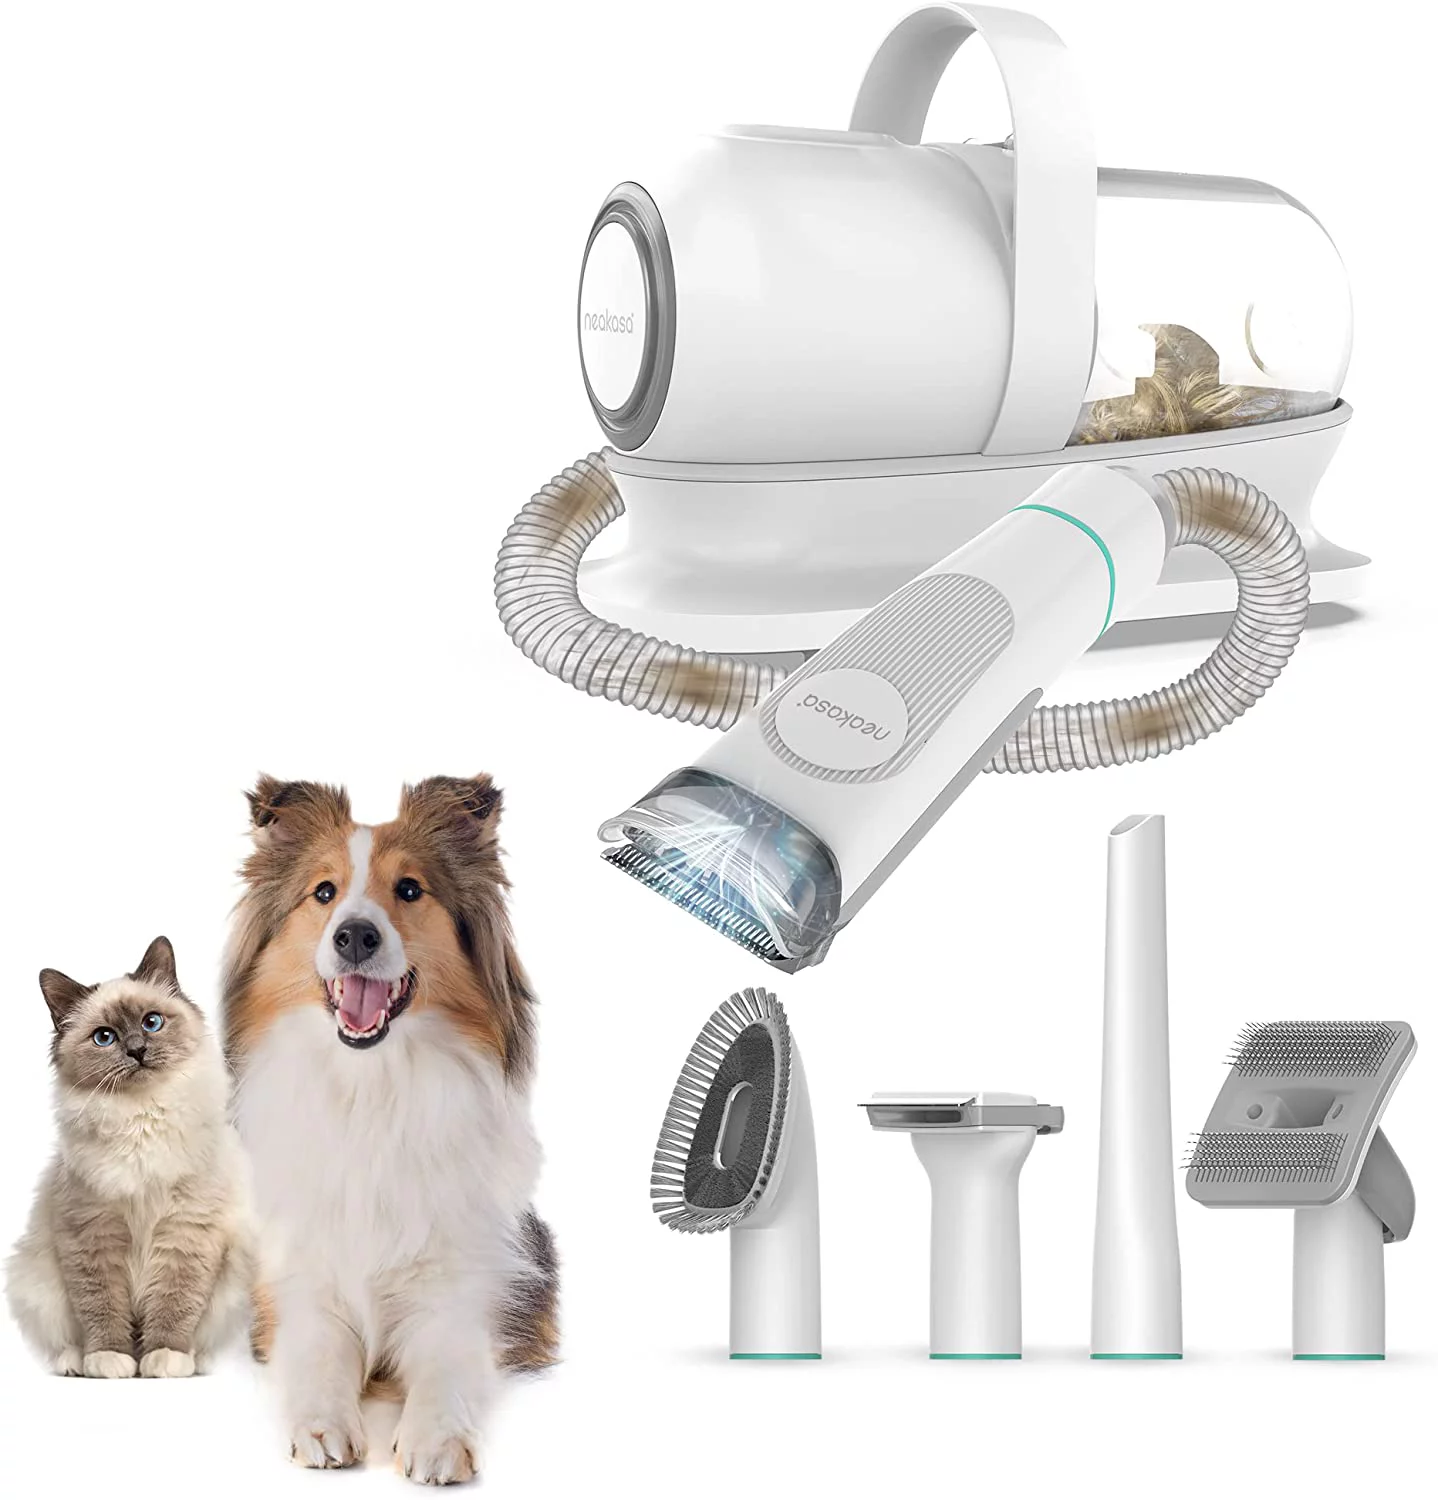 Grooming Kit For Pets With Vacuum Suction 99%